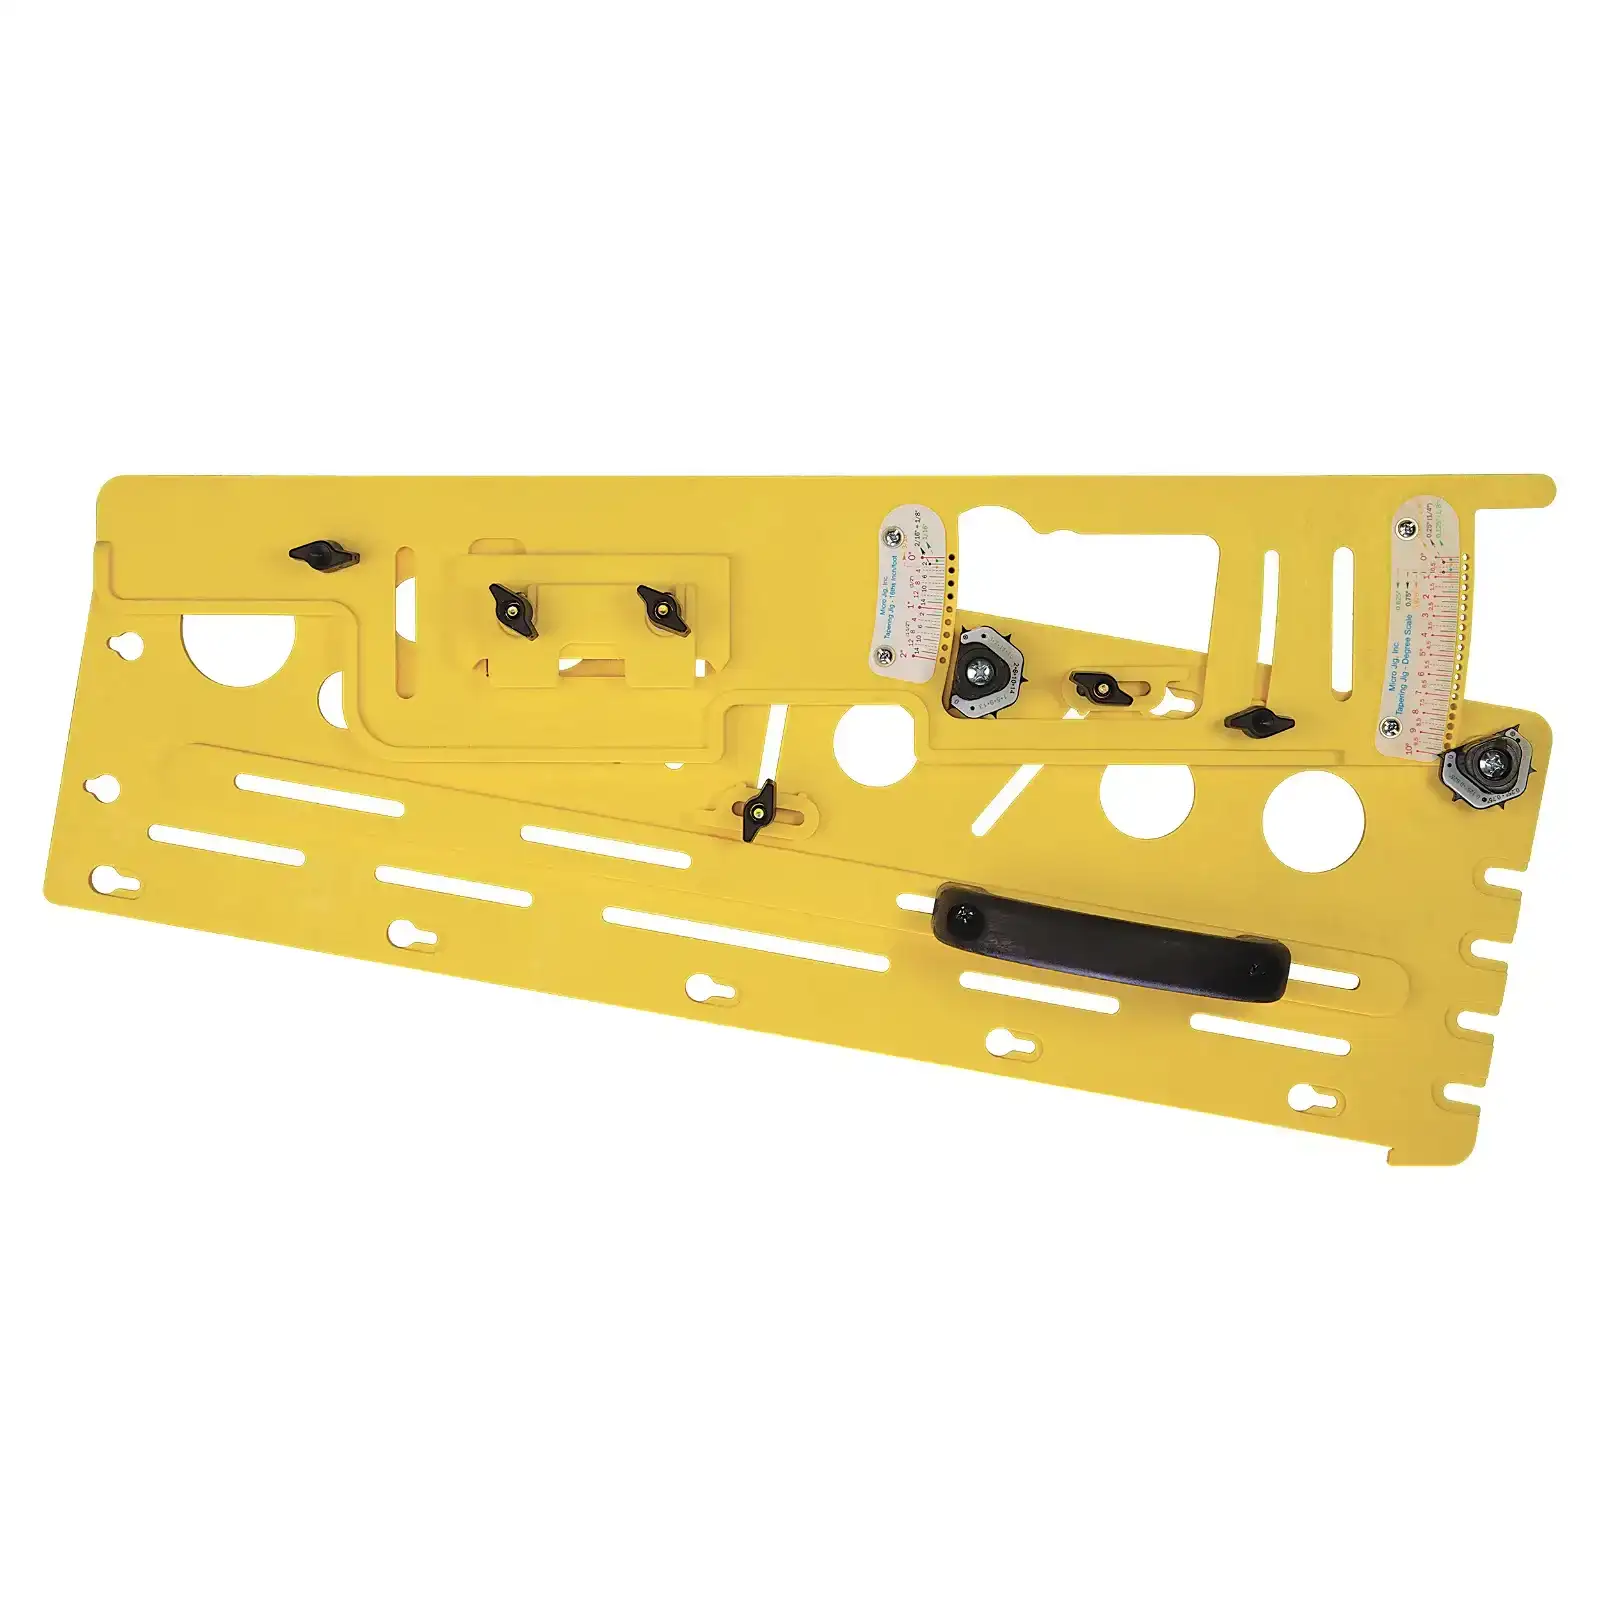 ONLY \\$99 - MicroJig® MICRODIAL® Tapering Jig